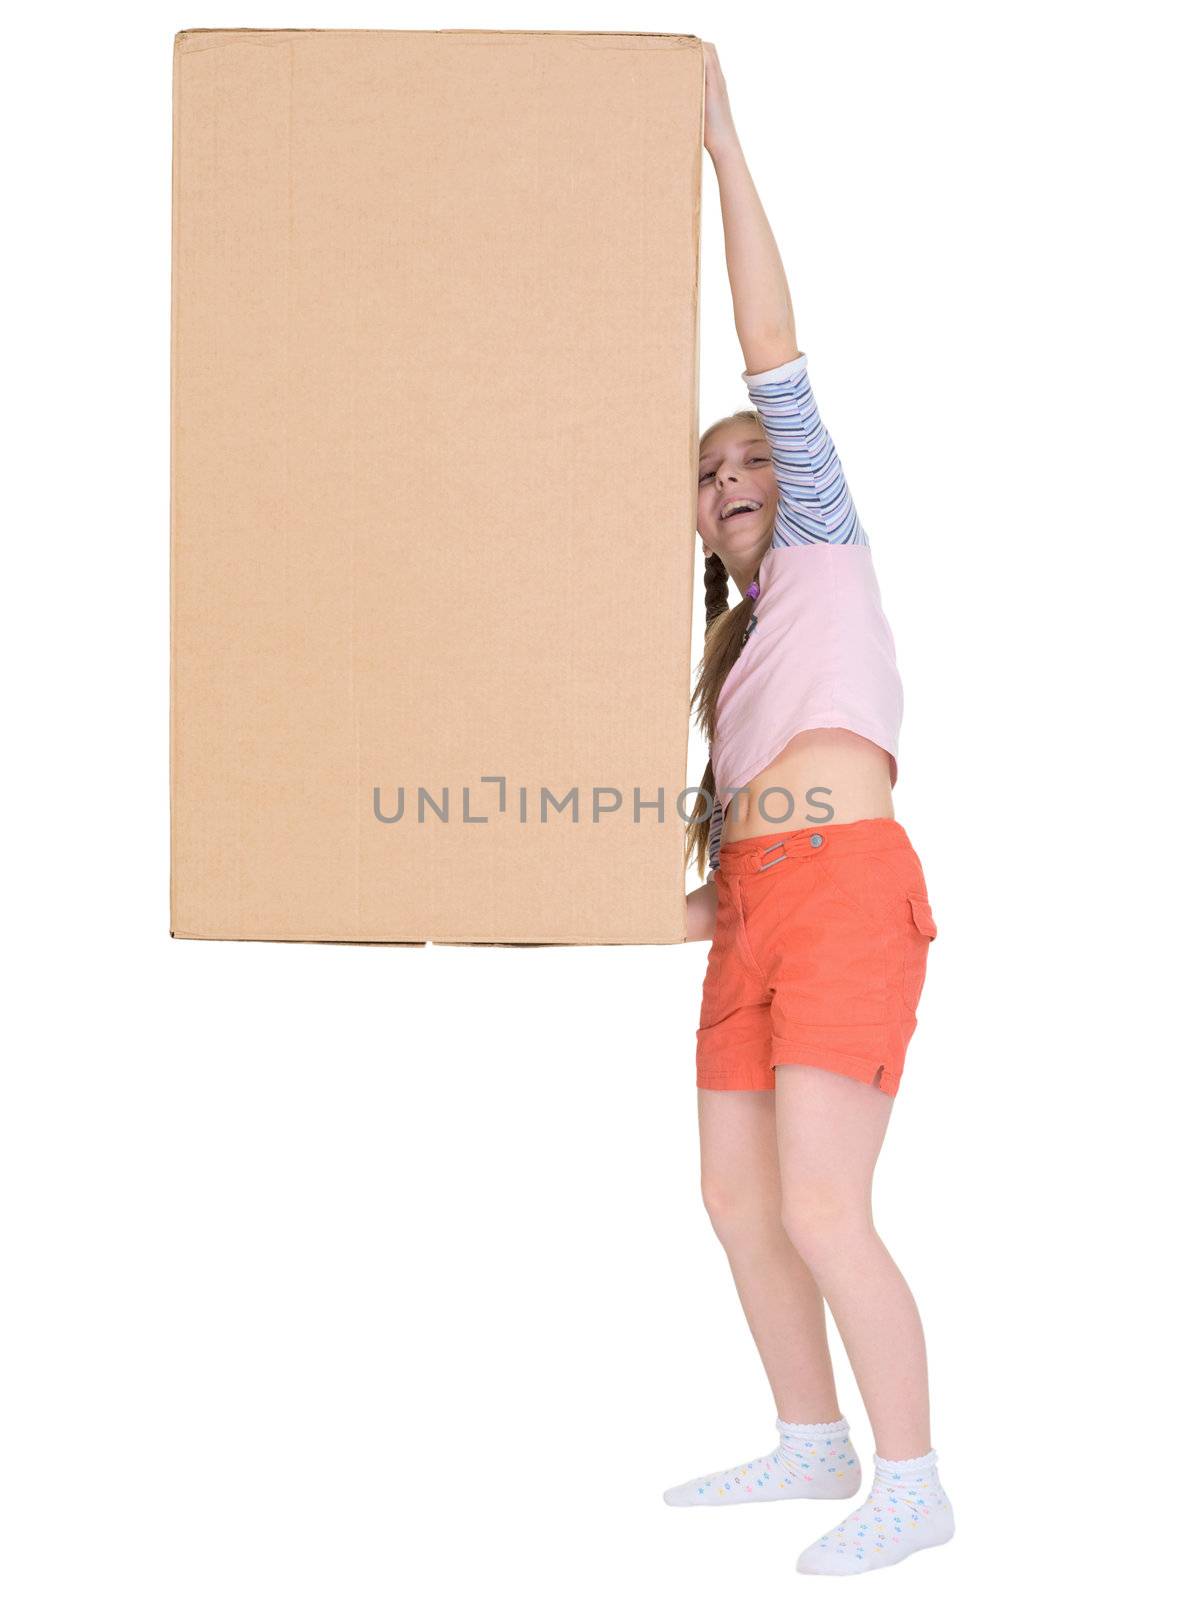 The small cheerful girl drags the big cardboard box isolated on white